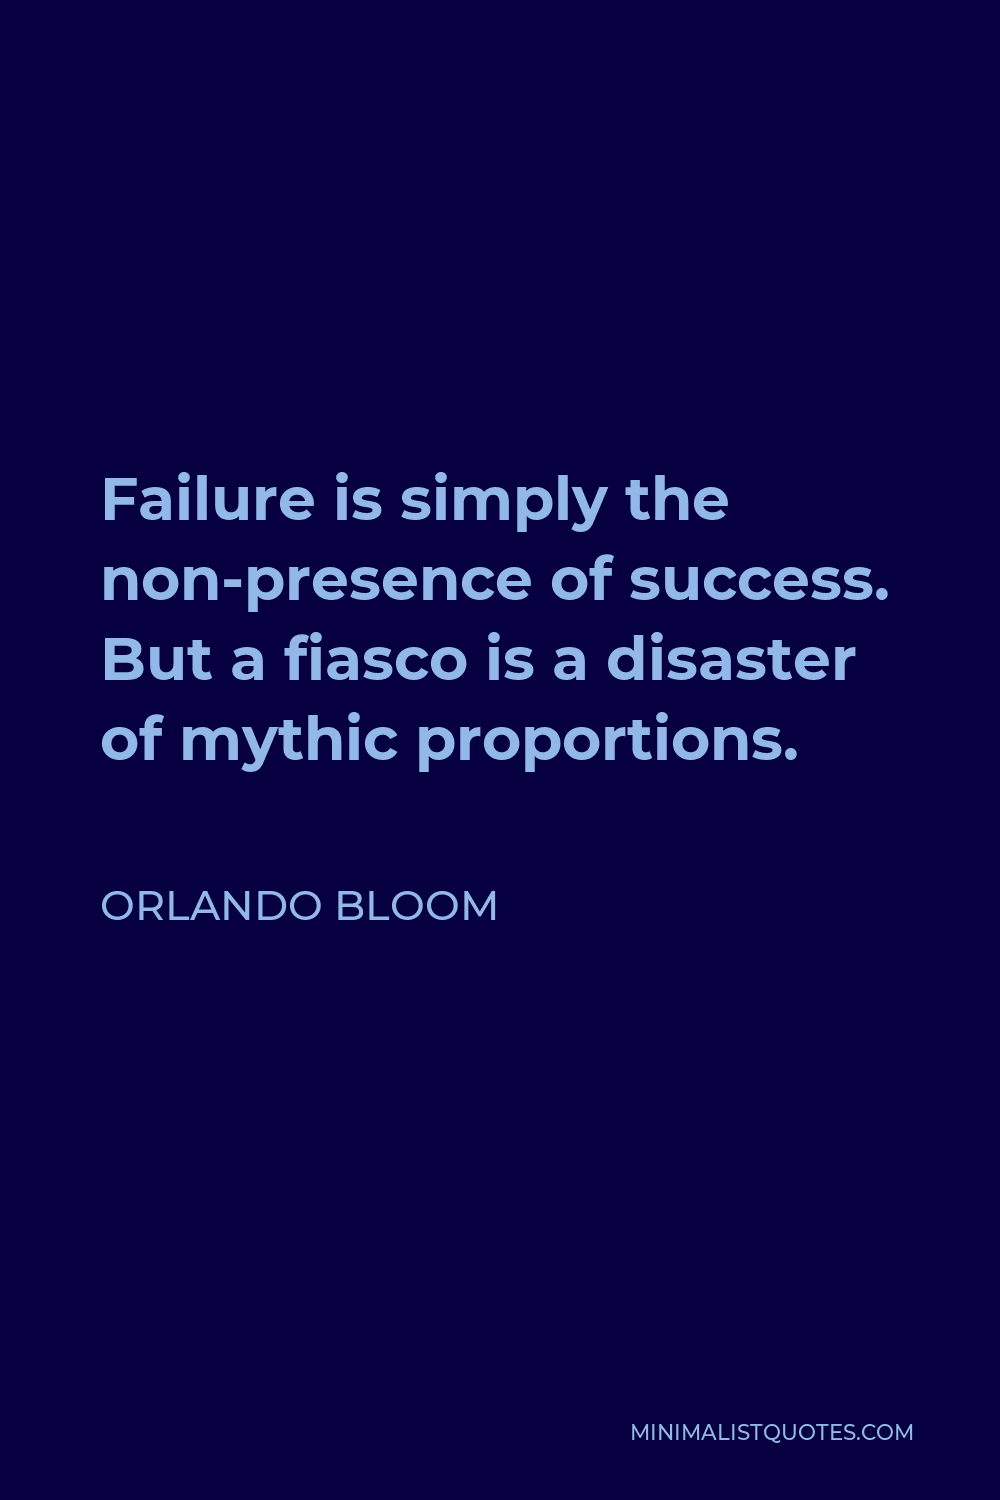 Orlando Bloom Quote - Failure is simply the non-presence of success. But a fiasco is a disaster of mythic proportions.